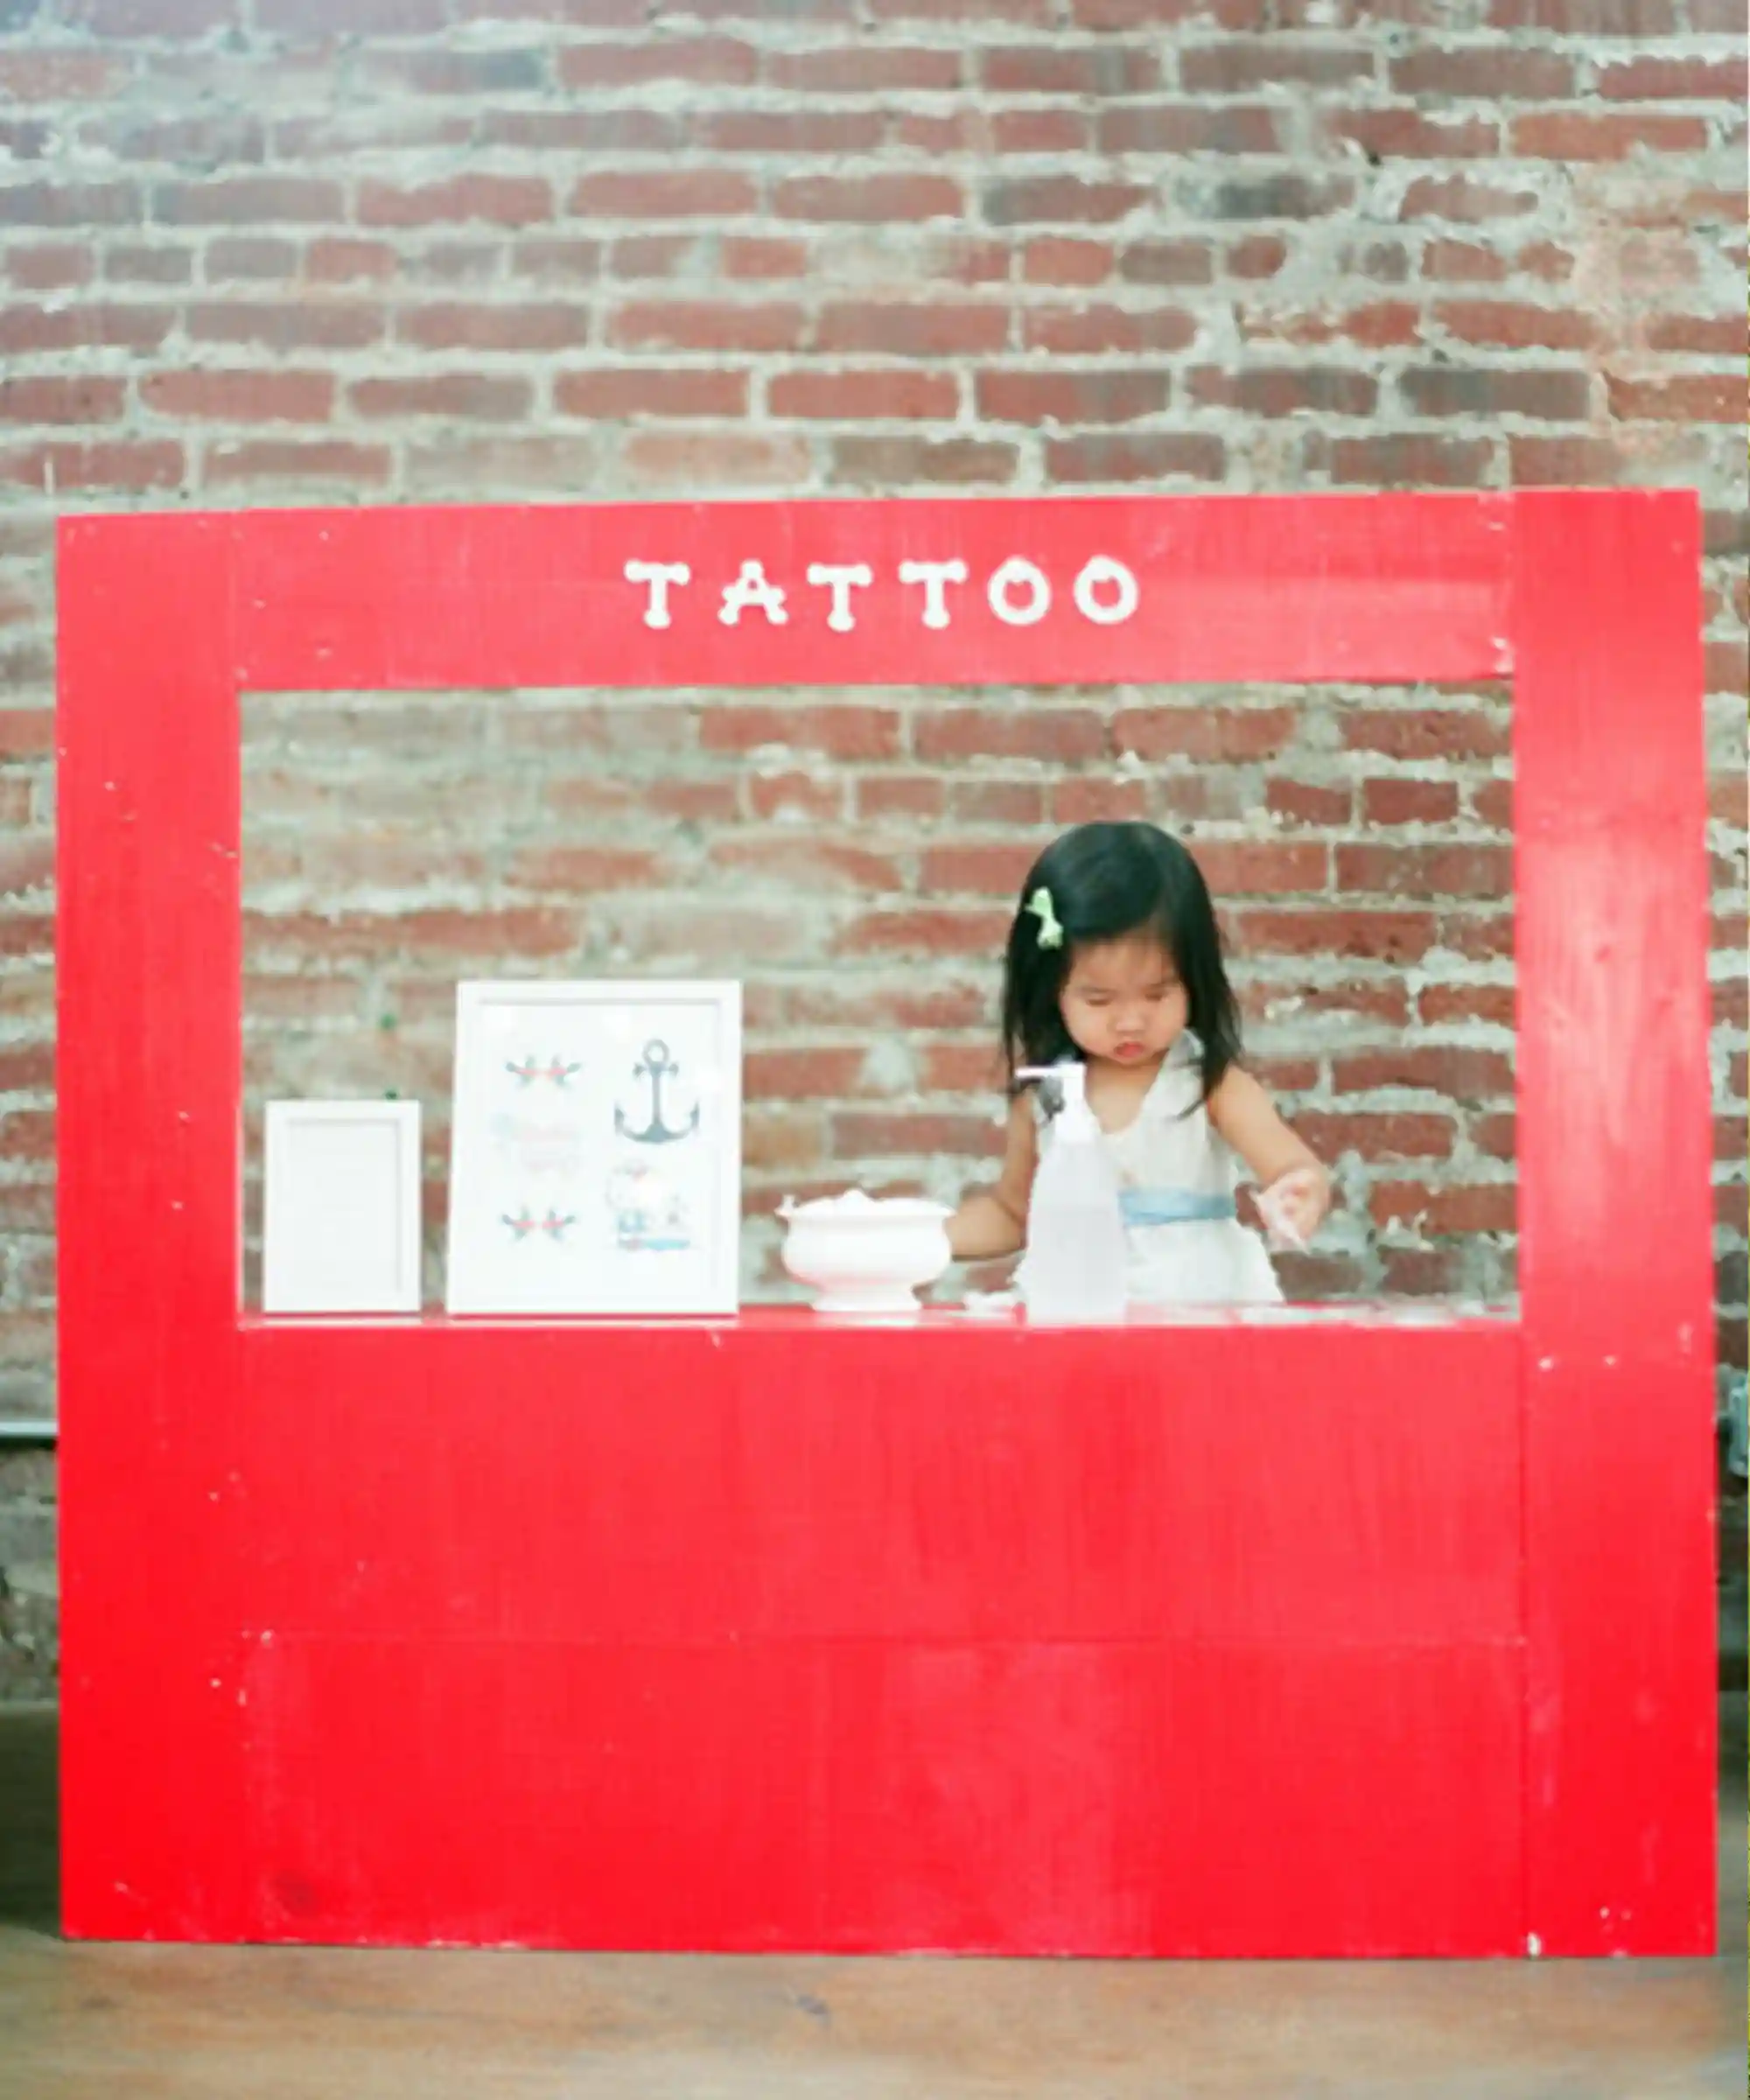 Carnival Party Ideas - Tattoo Booth by Hello Wonderful